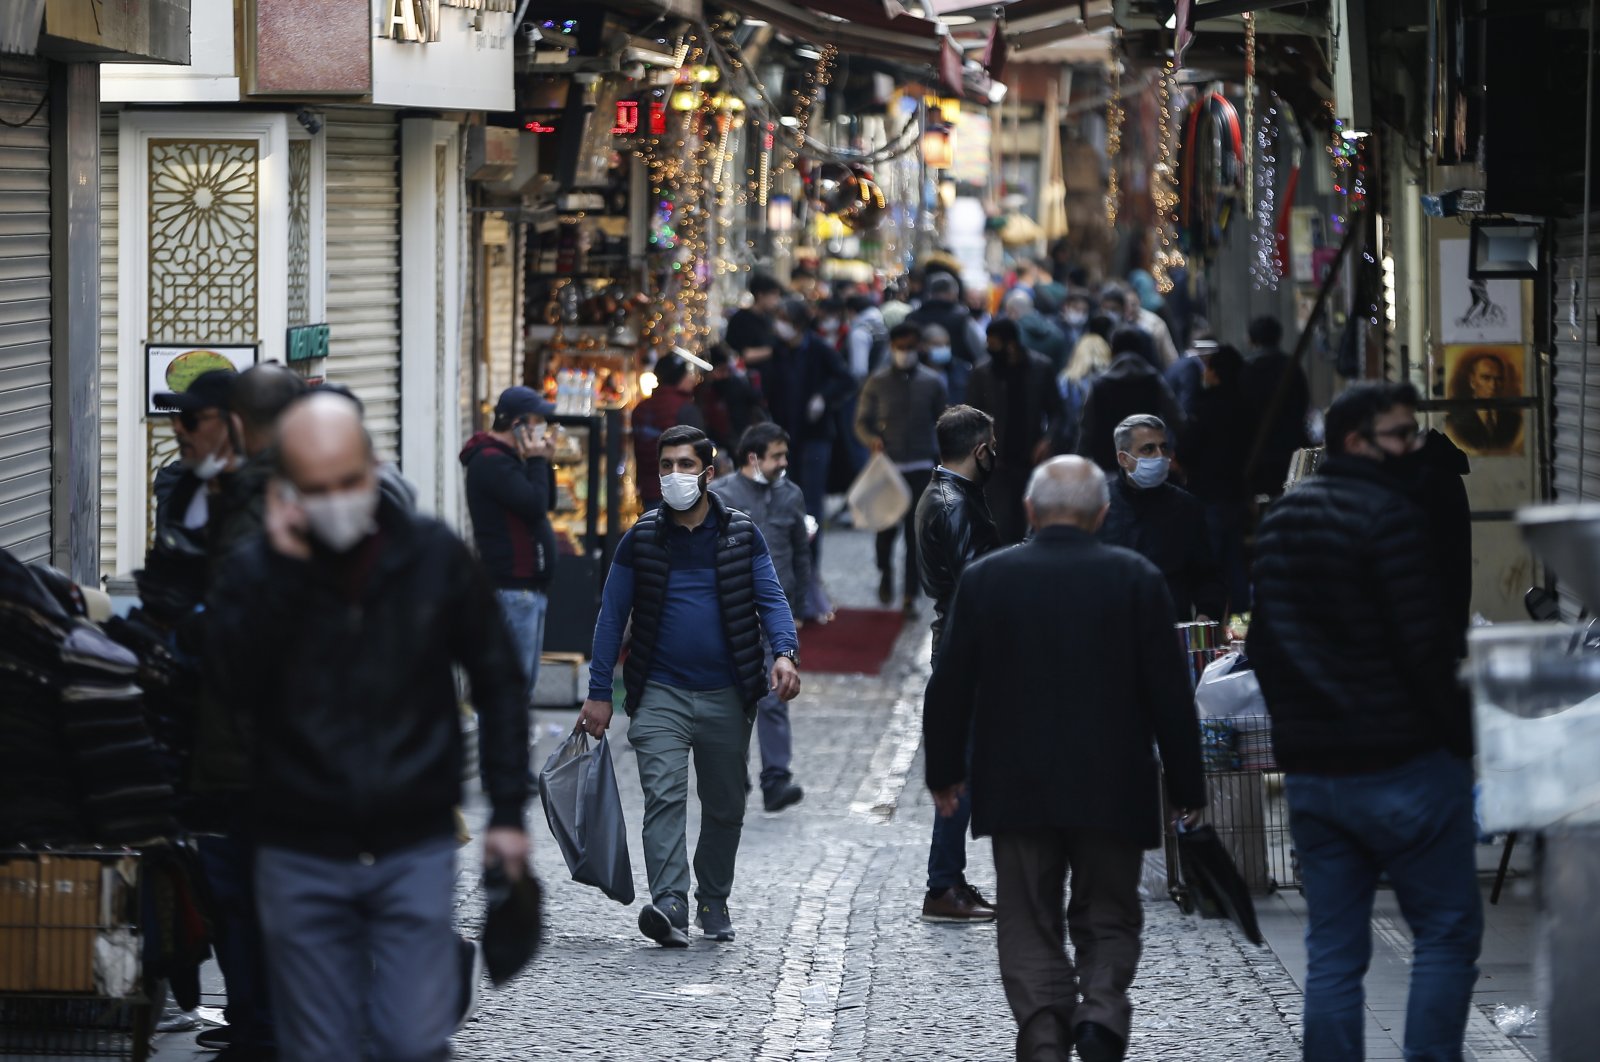 People, some wearing masks as a preventive measure against the spread of coronavirus, walk at Eminonu Bazaar in Istanbul, Friday, April 17, 2020, just hours before the start of a two-day curfew declared by Turkey's government in an attempt to control the spread of coronavirus. (AP Photo)